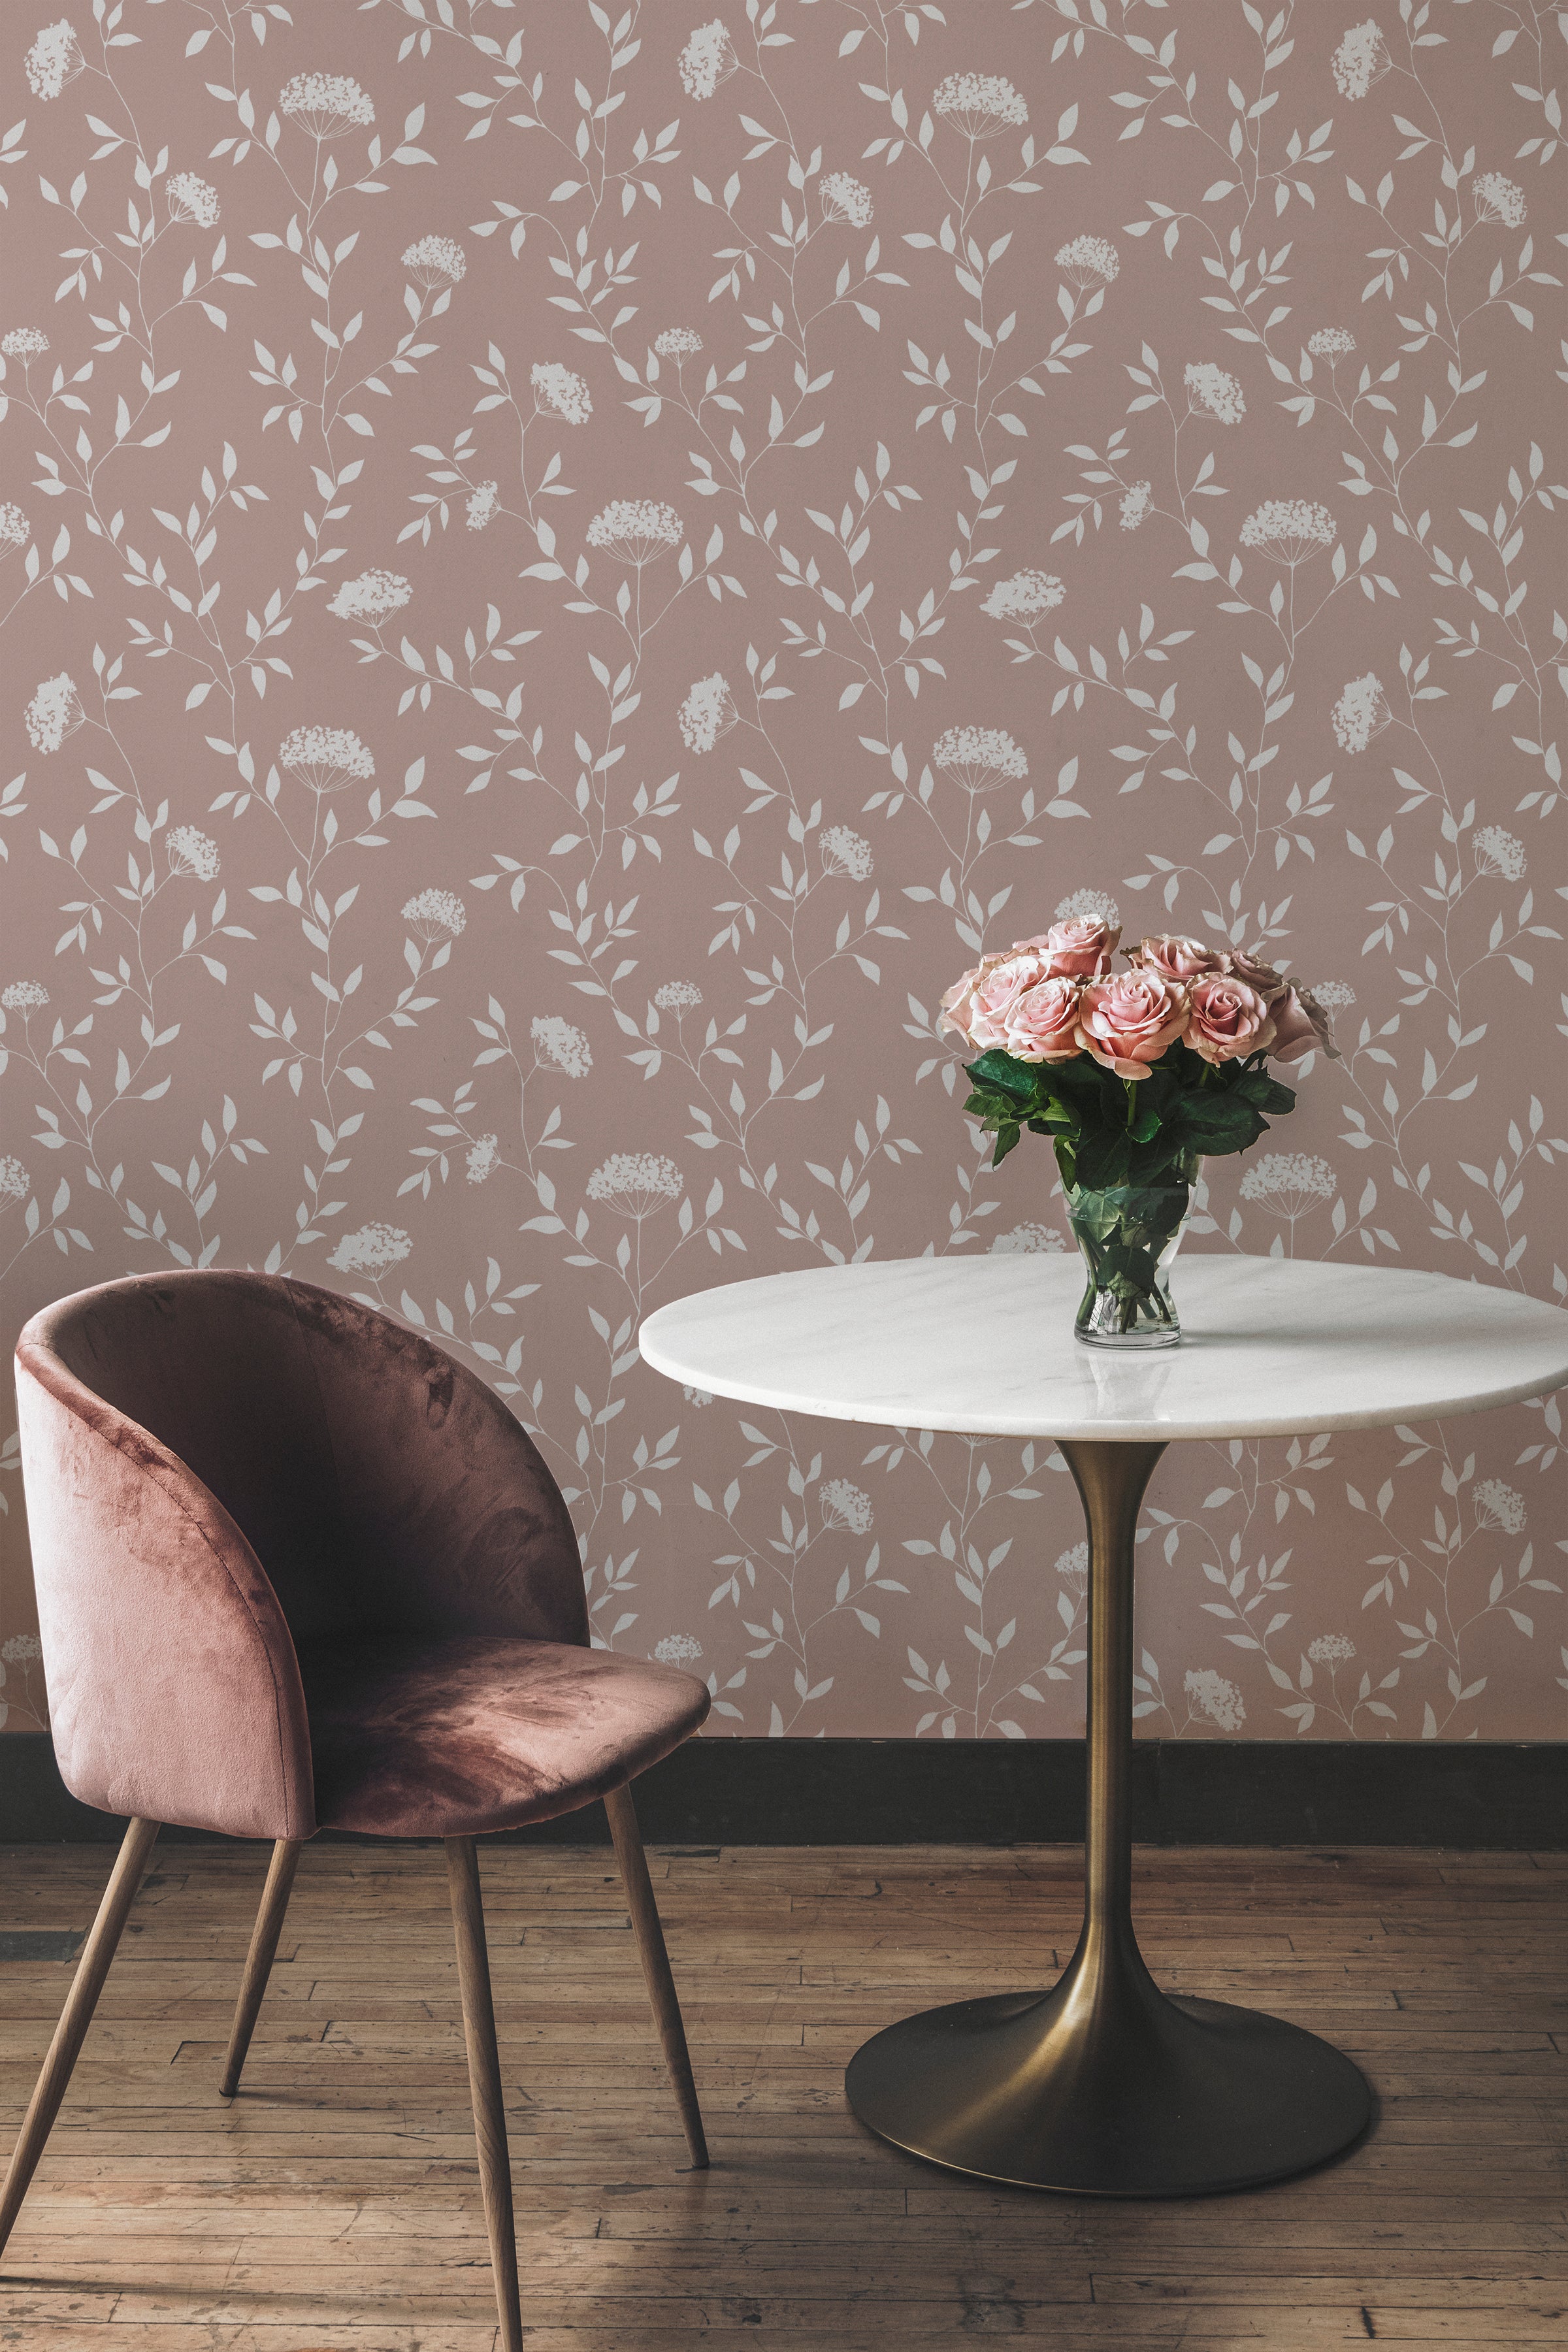 A chic corner of a room featuring the Botanical Elegance wallpaper in taupe with white floral patterns. A velvet pink chair and a round table with a vase of pink roses complement the wallpaper, adding a touch of sophistication.